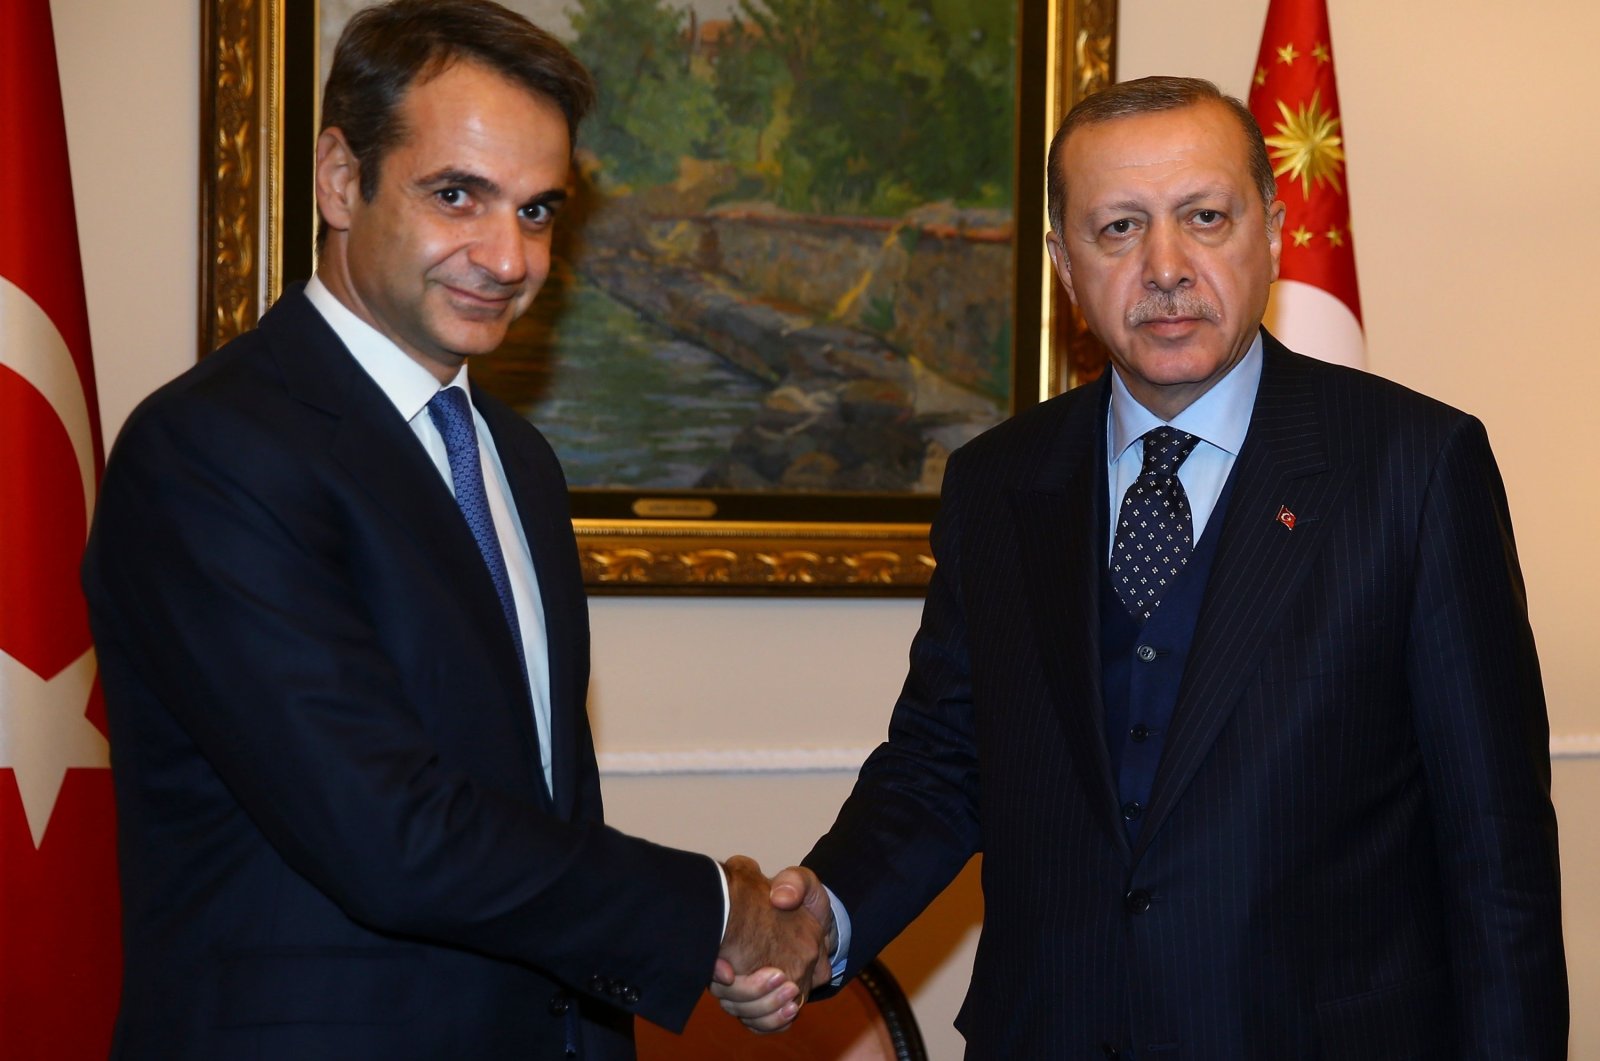 President Recep Tayyip Erdoğan (R), on a two-day official visit to Greece, meets Kyriakos Mitsotakis, then-leader of the main opposition New Democracy party, Athens, Greece, Dec. 7, 2017. (AP File Photo)